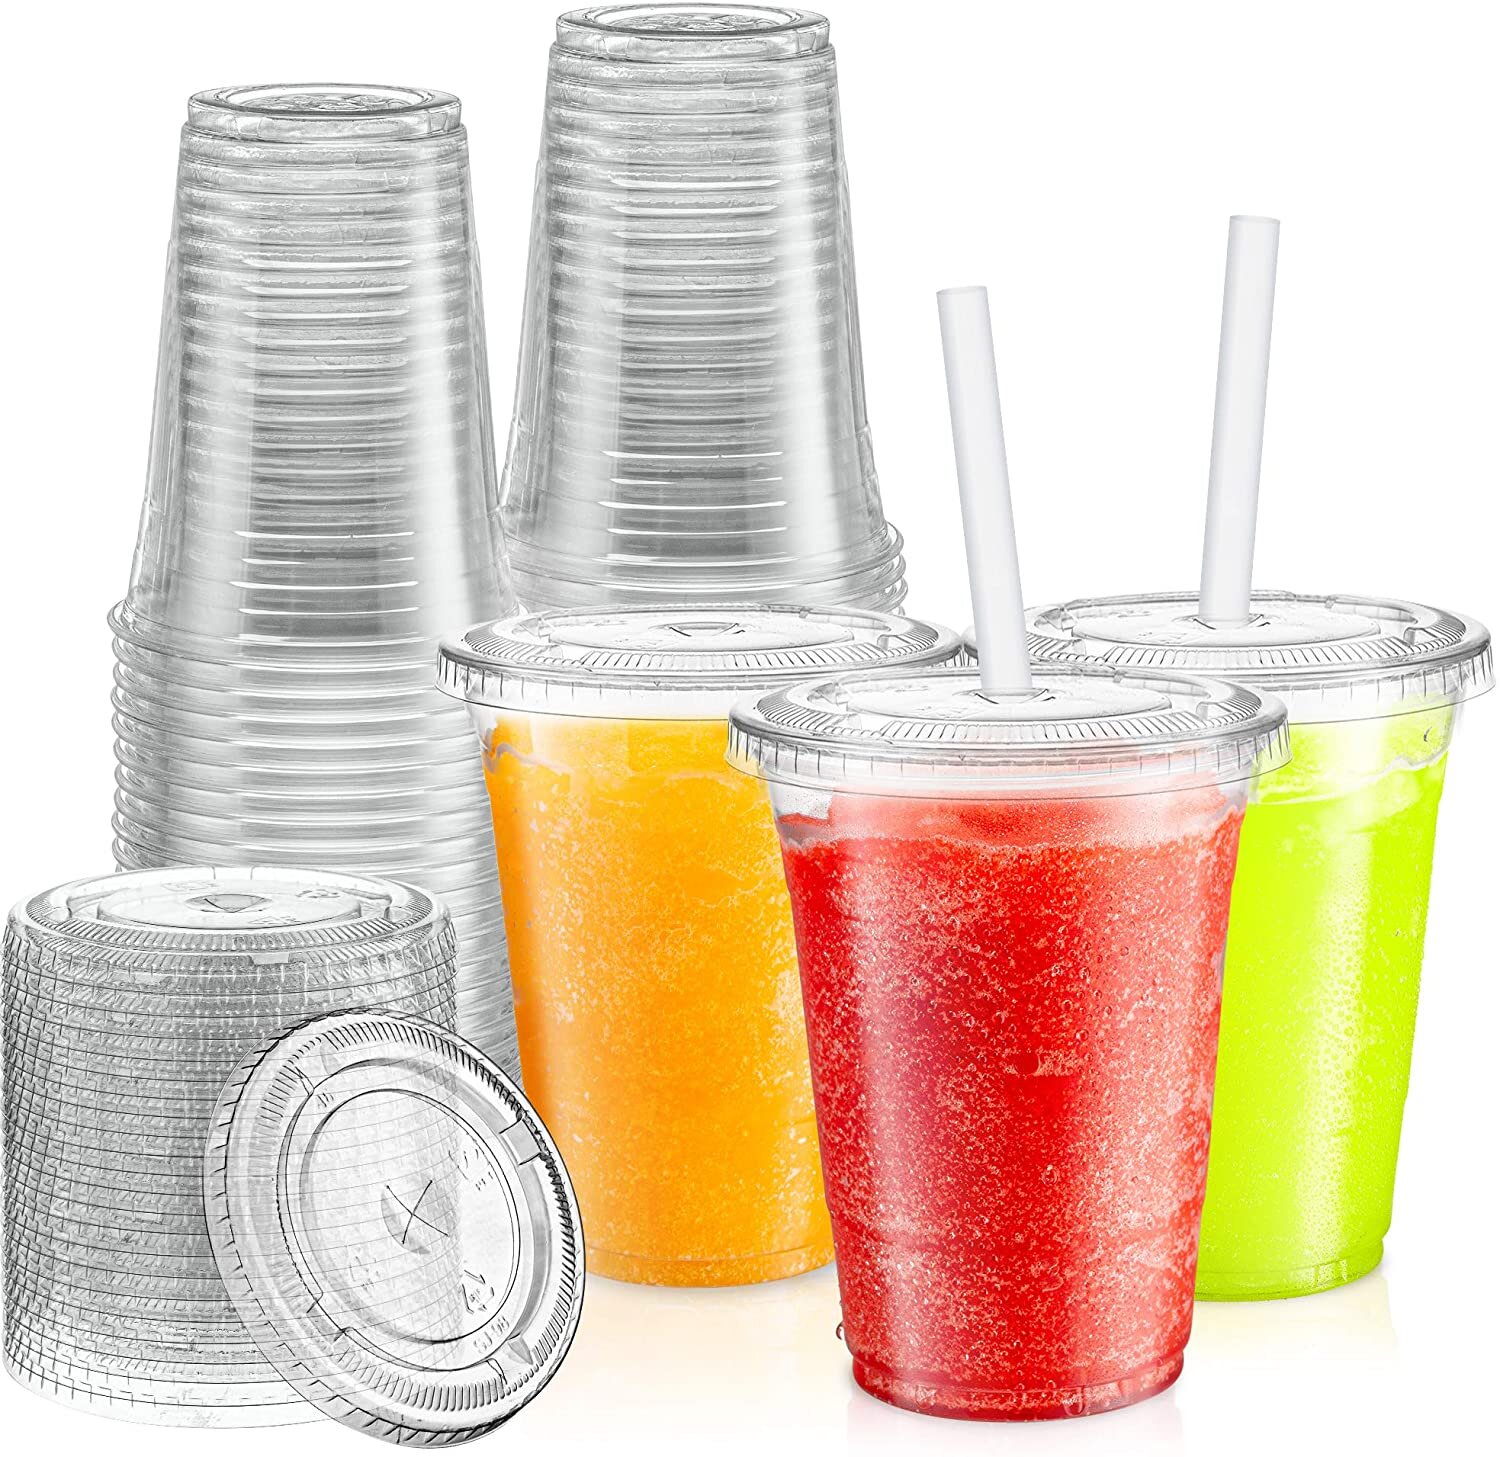 clear cups and lids.jpg